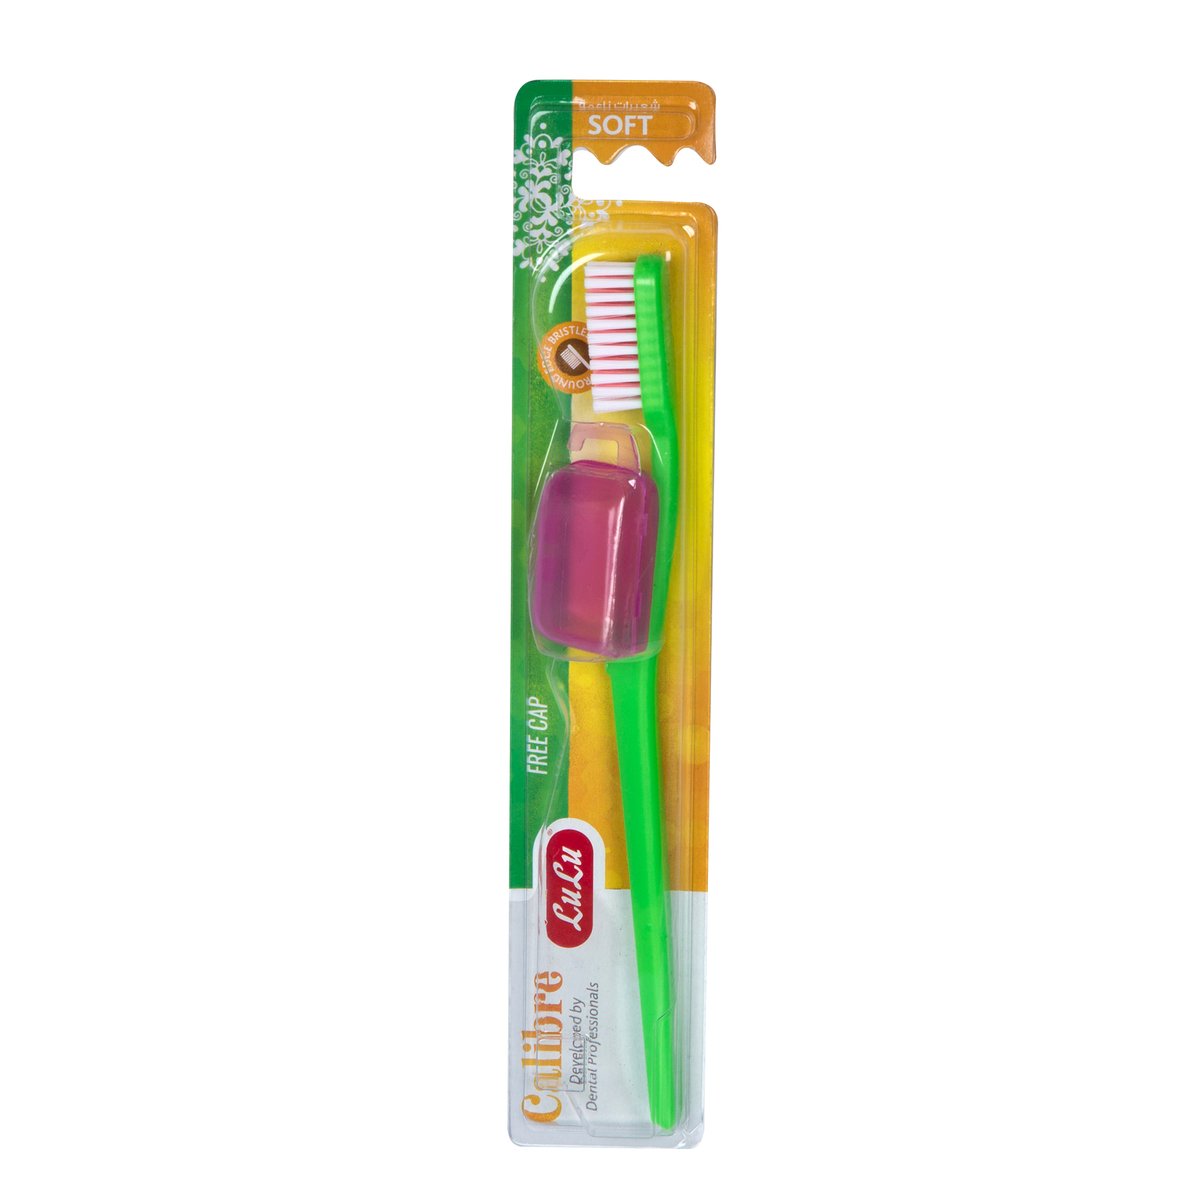 Lulu Toothbrush Soft Calibre Assorted Color 1pc